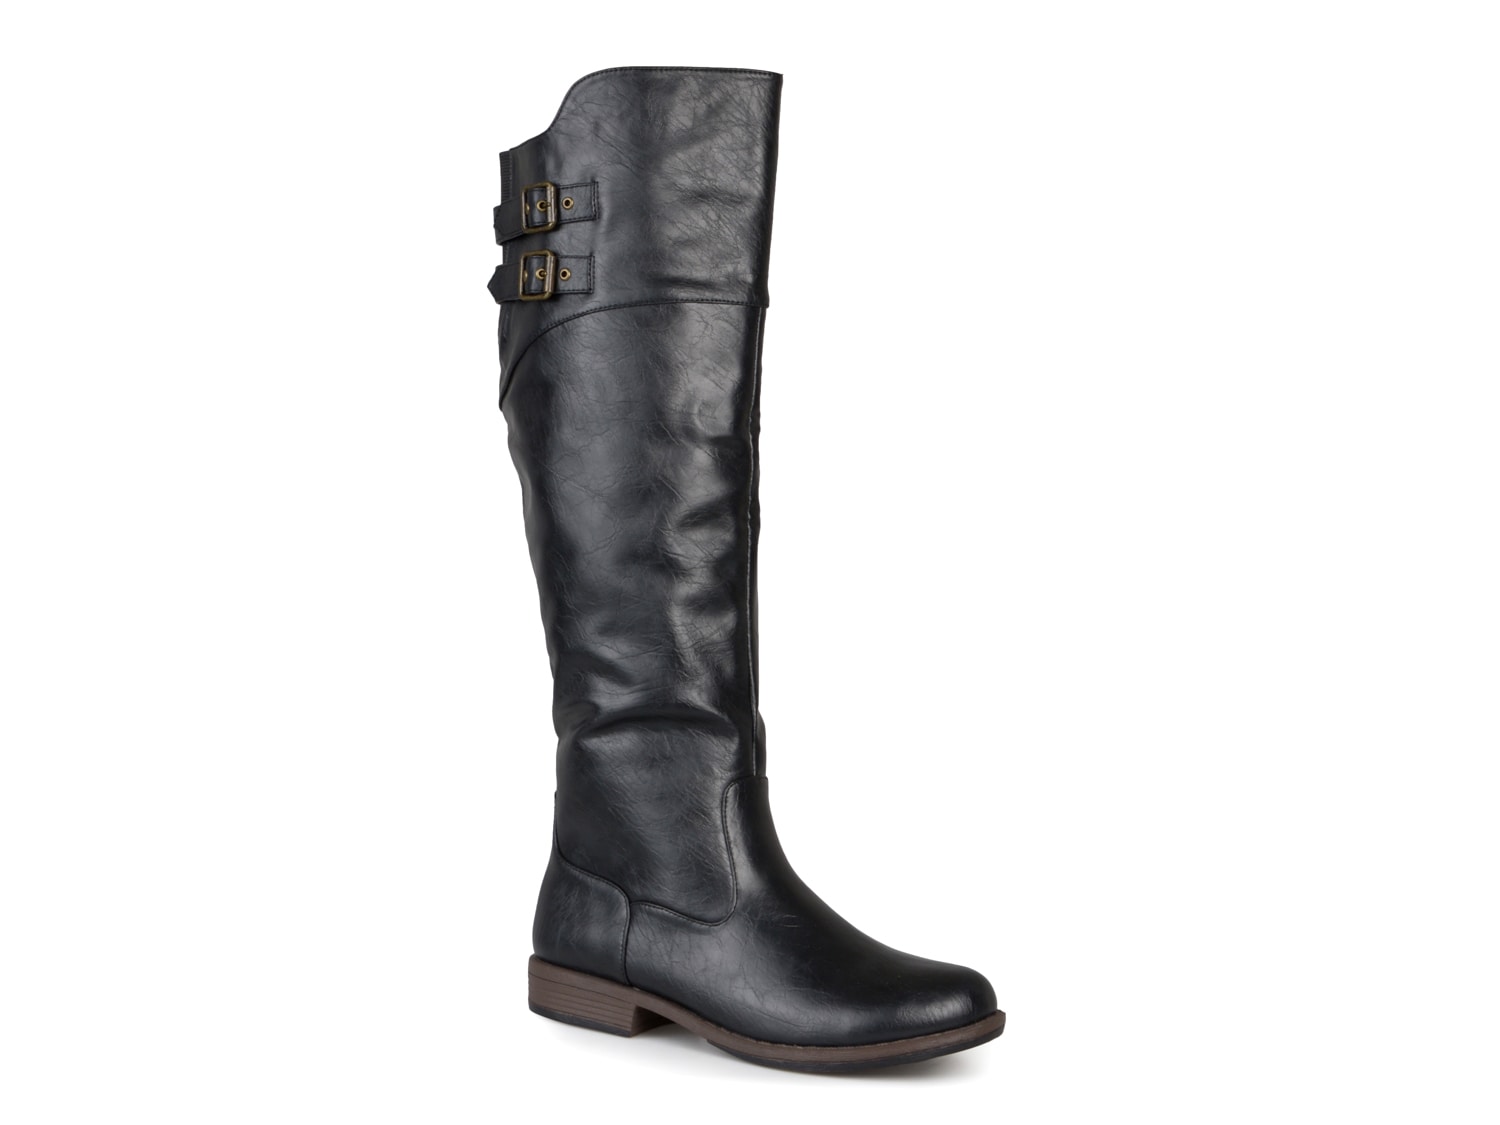 Journee Collection Tori Extra Wide Calf Boot - Free Shipping | DSW